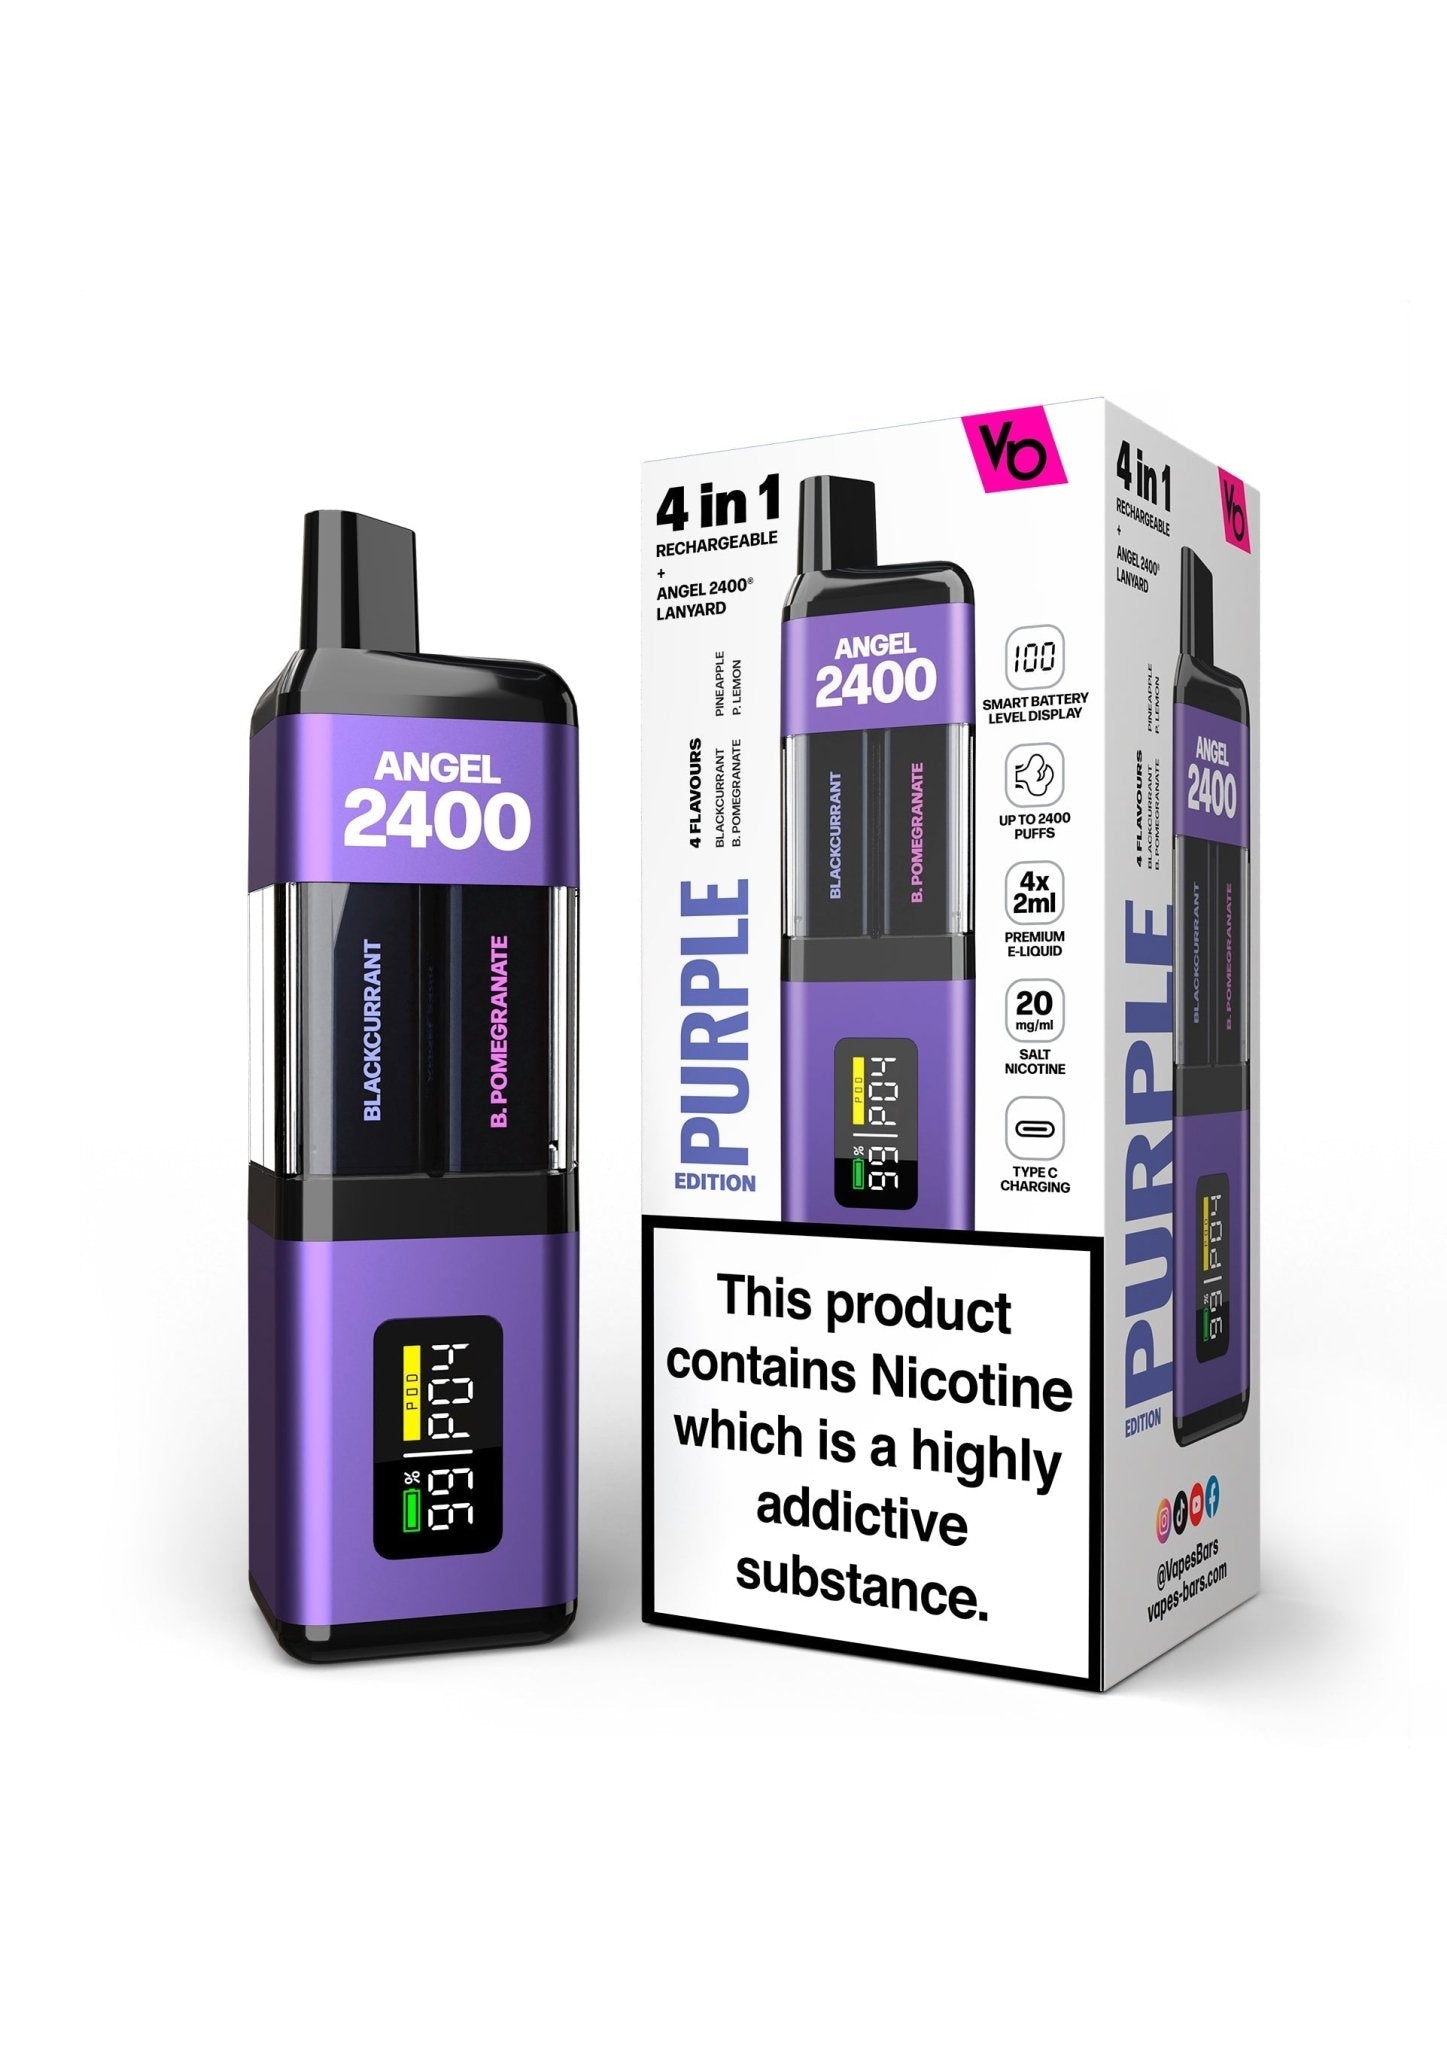 Angel 2400 Puffs Disposble Vape by Vapes Bars (Pack of 5) - Wolfvapes.co.uk-Purple Edition (Multi Flavour)